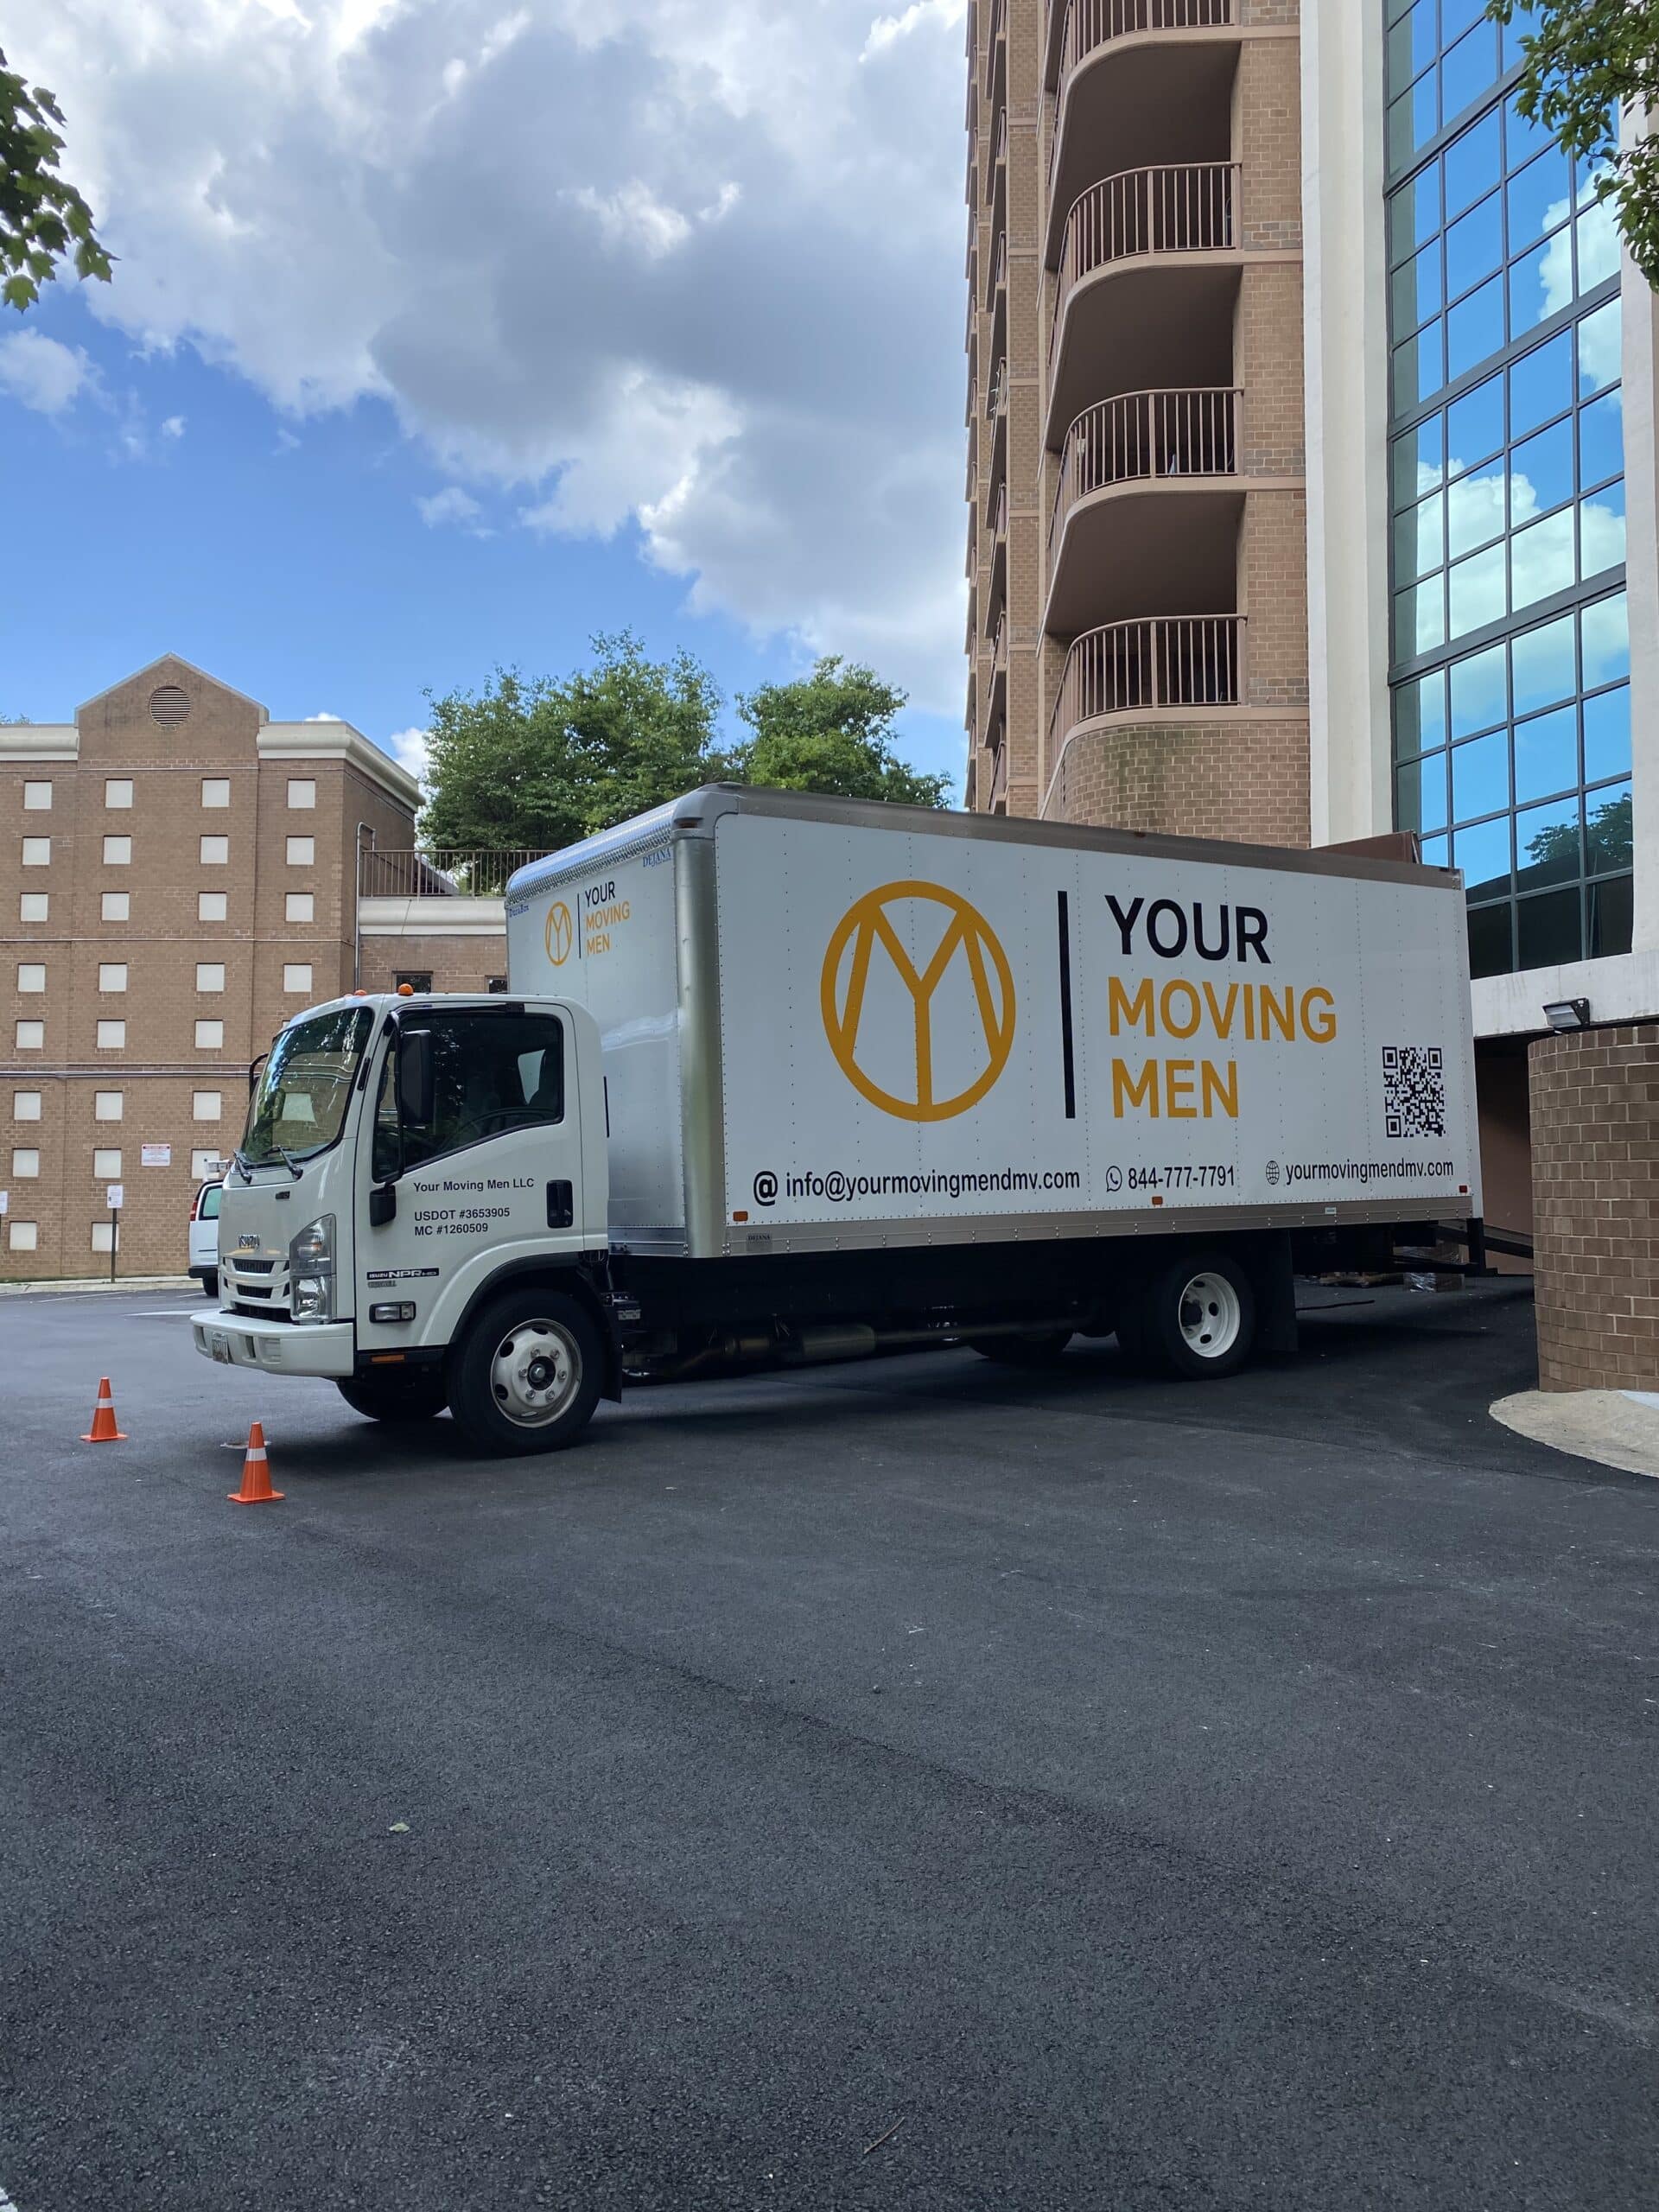 Best Moving Companies in Maryland, Virginia, and Washington, D.C.